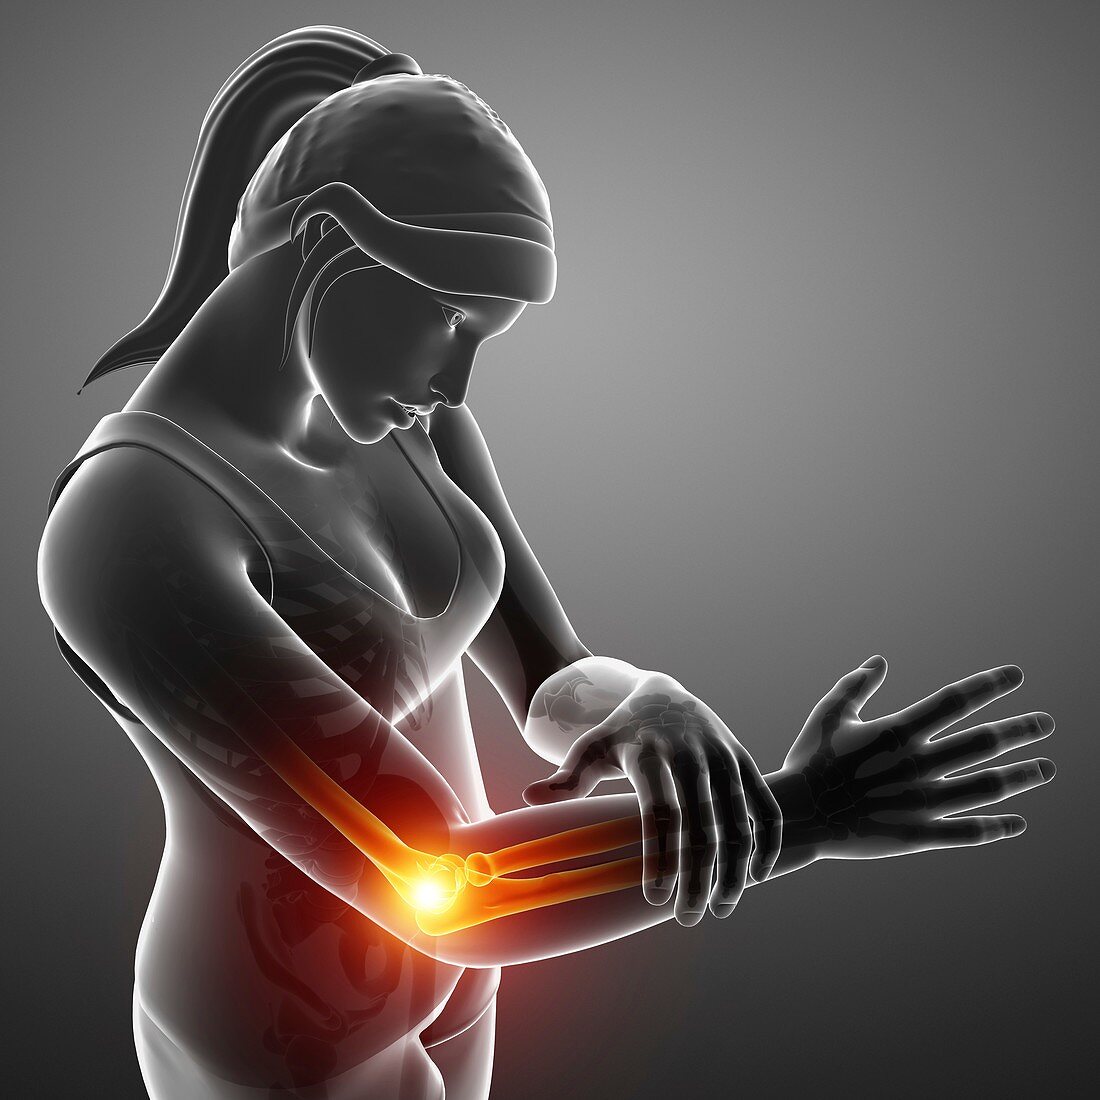 Woman with elbow pain, illustration